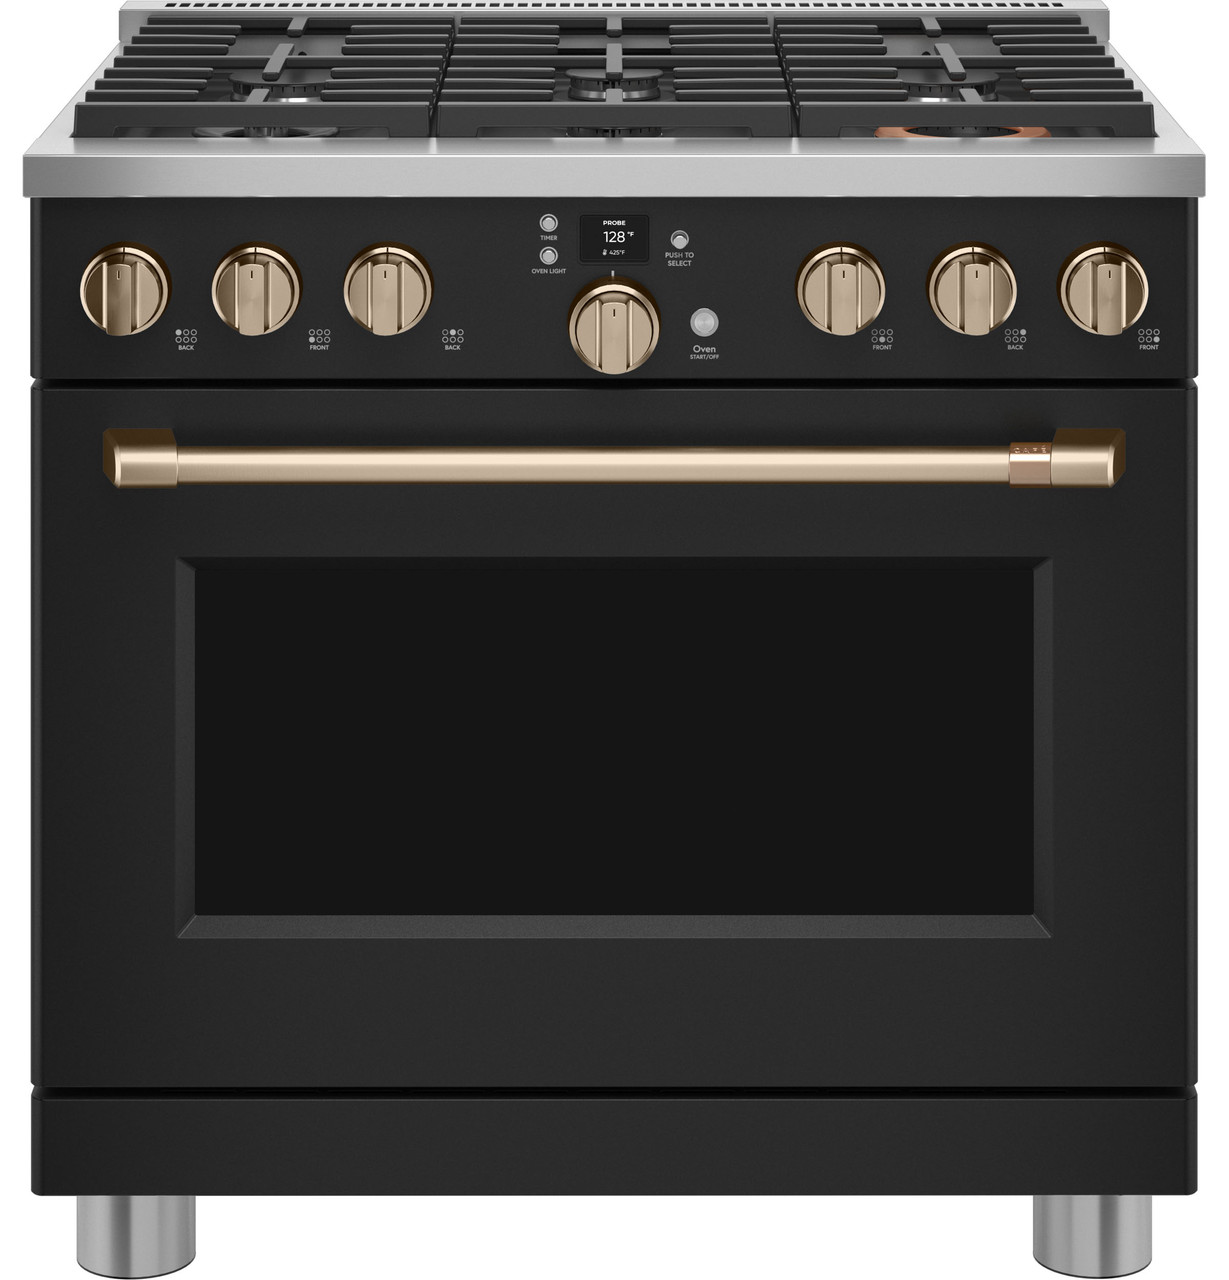 Le Chef Black Stainless Steel Hot Pot With Auto & New Shabbos Function